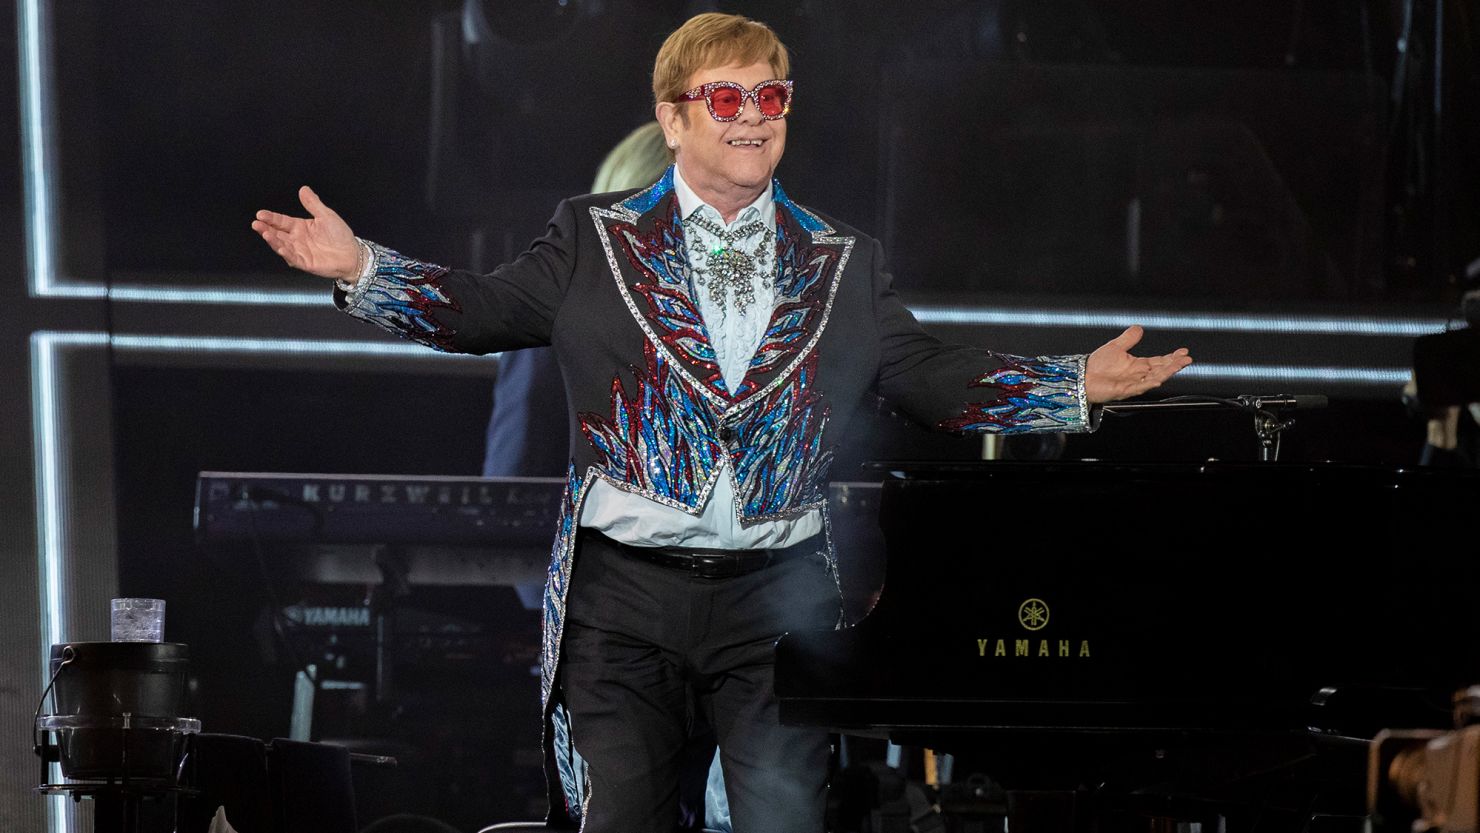 LOS ANGELES, CA - November 20, 2022 - Elton John performs in concert, the last of 3-night stand to finish the American leg of his farewell tour at Dodger Stadium on Sunday, Nov. 20, 2022 in Los Angeles, CA. (Brian van der Brug / Los Angeles Times via Getty Images)